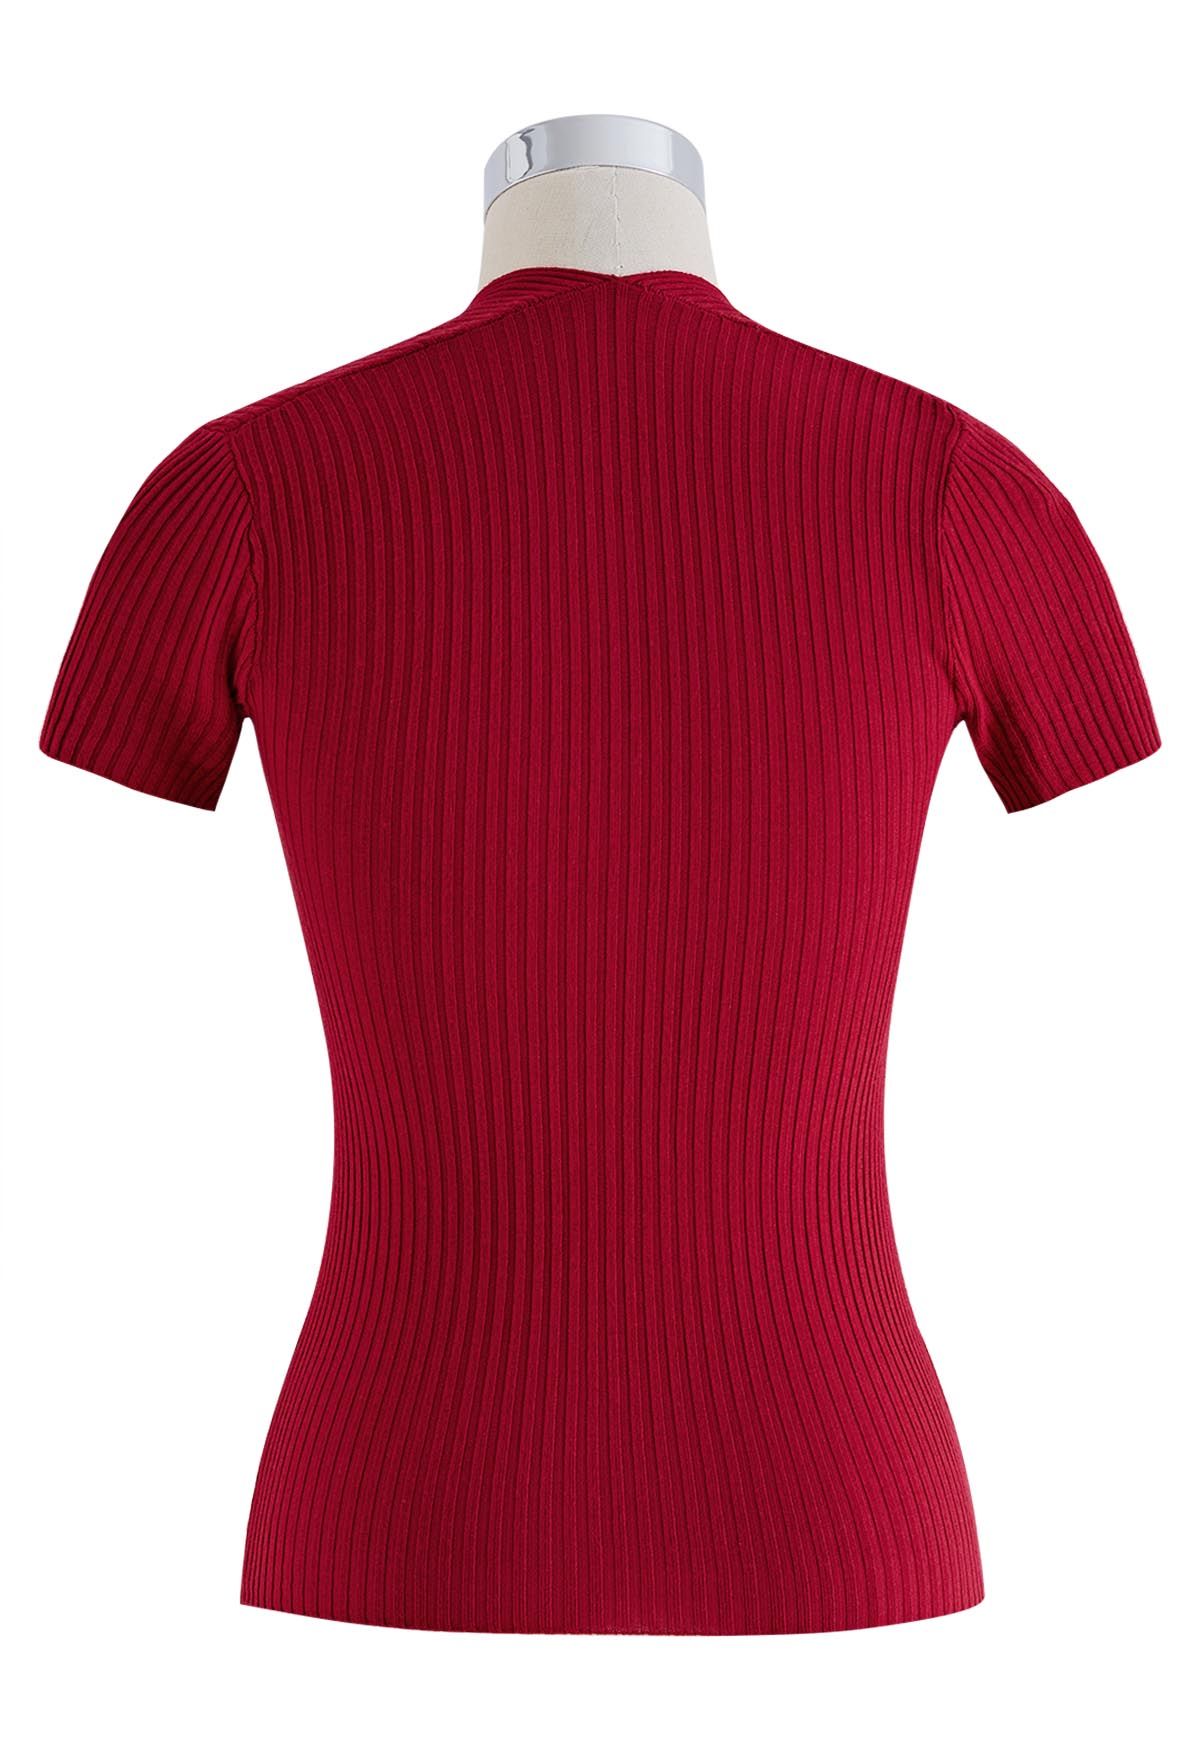 Square Neckline Ribbed Knit Top in Red